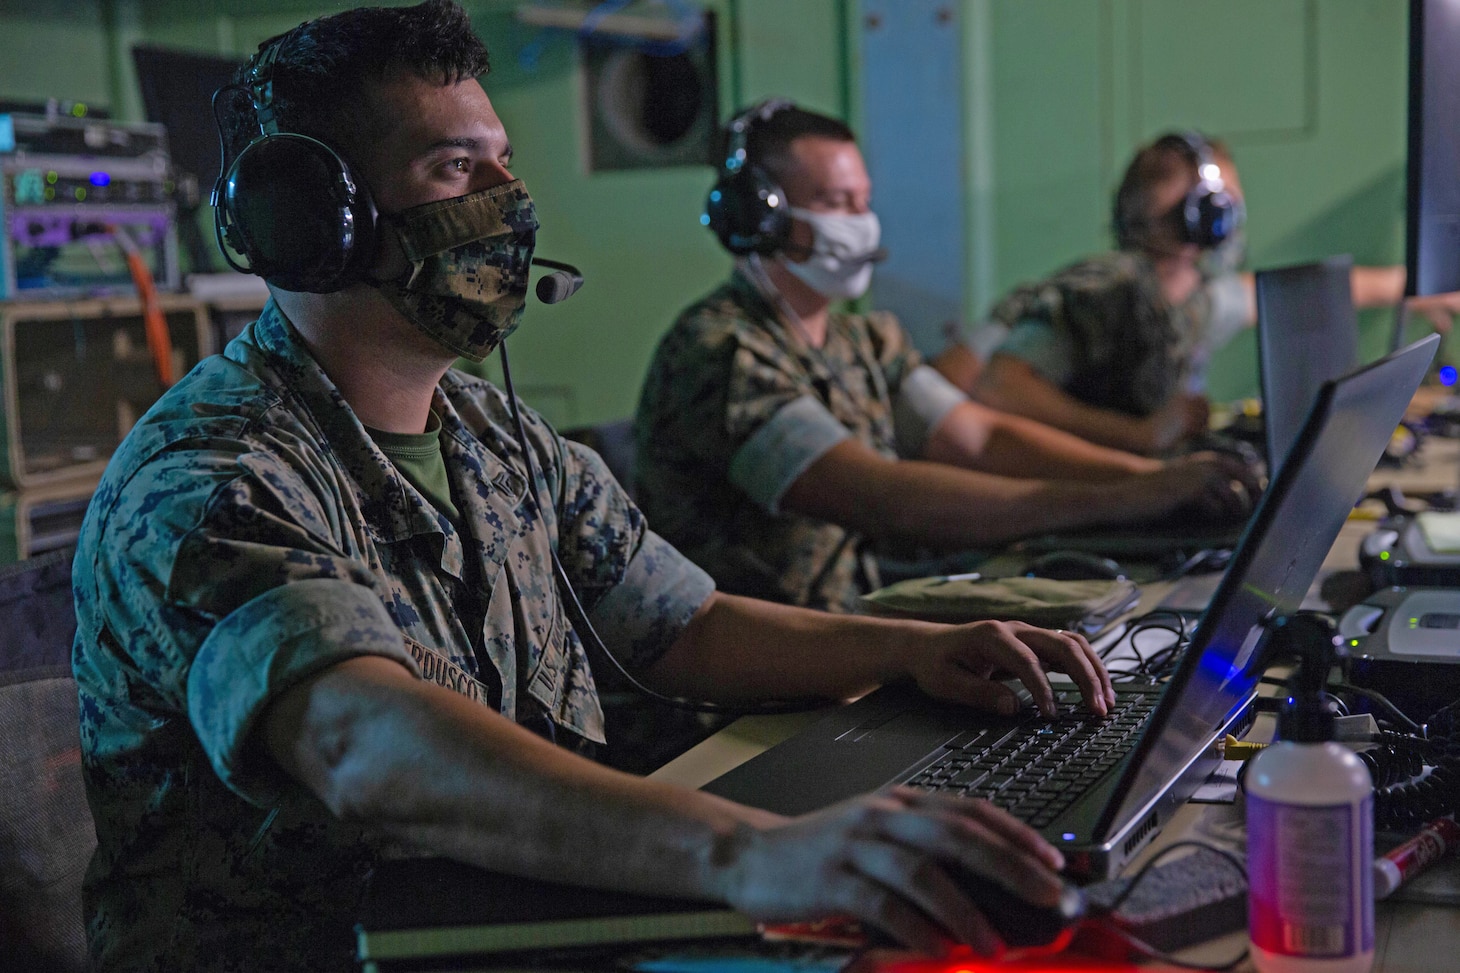 U.S. Marines with Marine Air Control Squadron 2 monitor simulated aircraft communications during exercise MISTEX-20 at Marine Corps Air Station Cherry Point, North Carolina, July 28, 2020. During the exercise, Marines practiced setting up communication between squadrons in Marine Air Control Group 28 while also exercising aircraft control skills necessary for successful combat flights in an expeditionary setting.